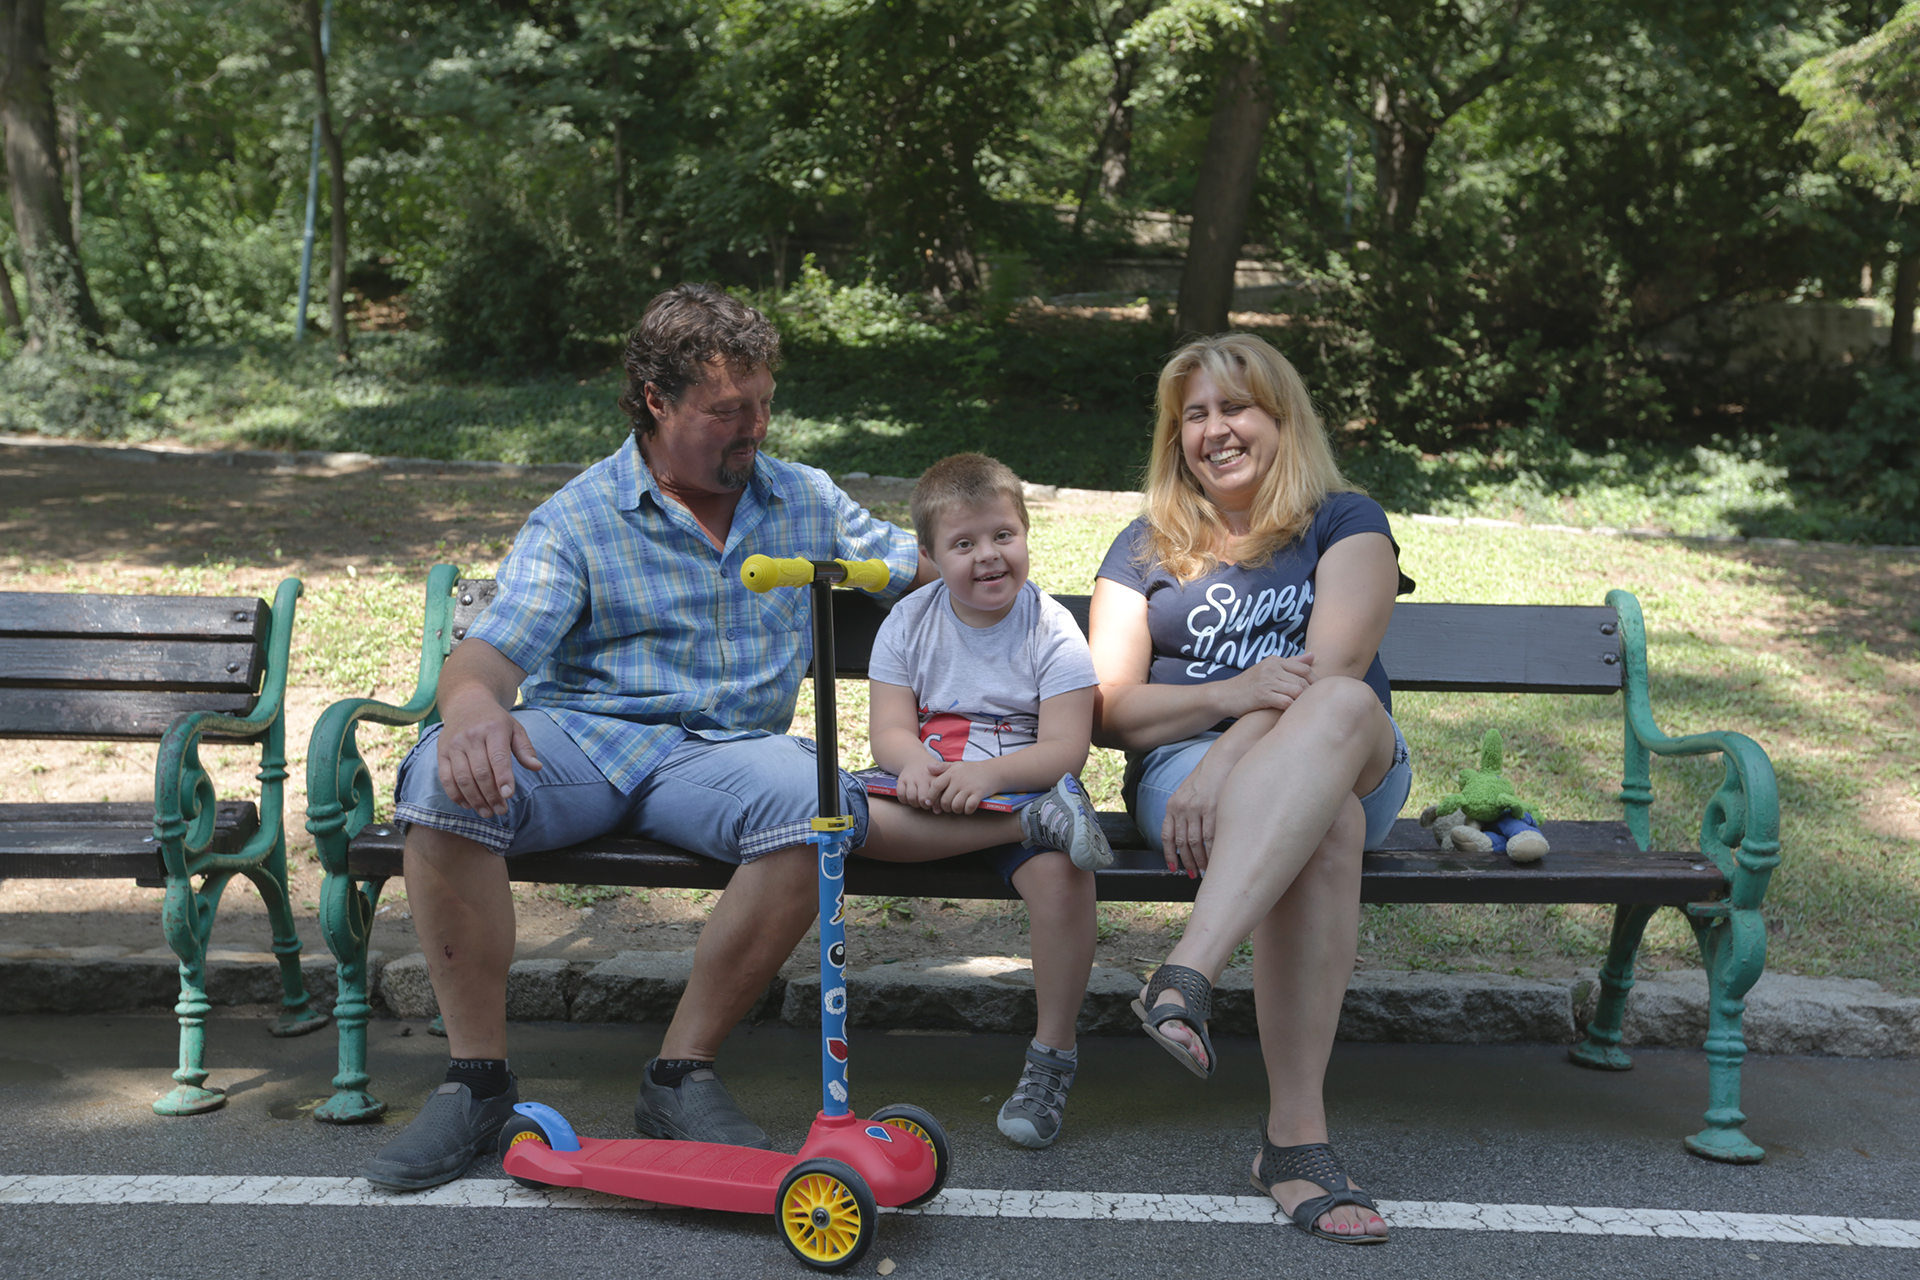 Georgi, who has down syndrome, sits on a bench in a park with his parents on either side and a red scooter. They are all laughing.